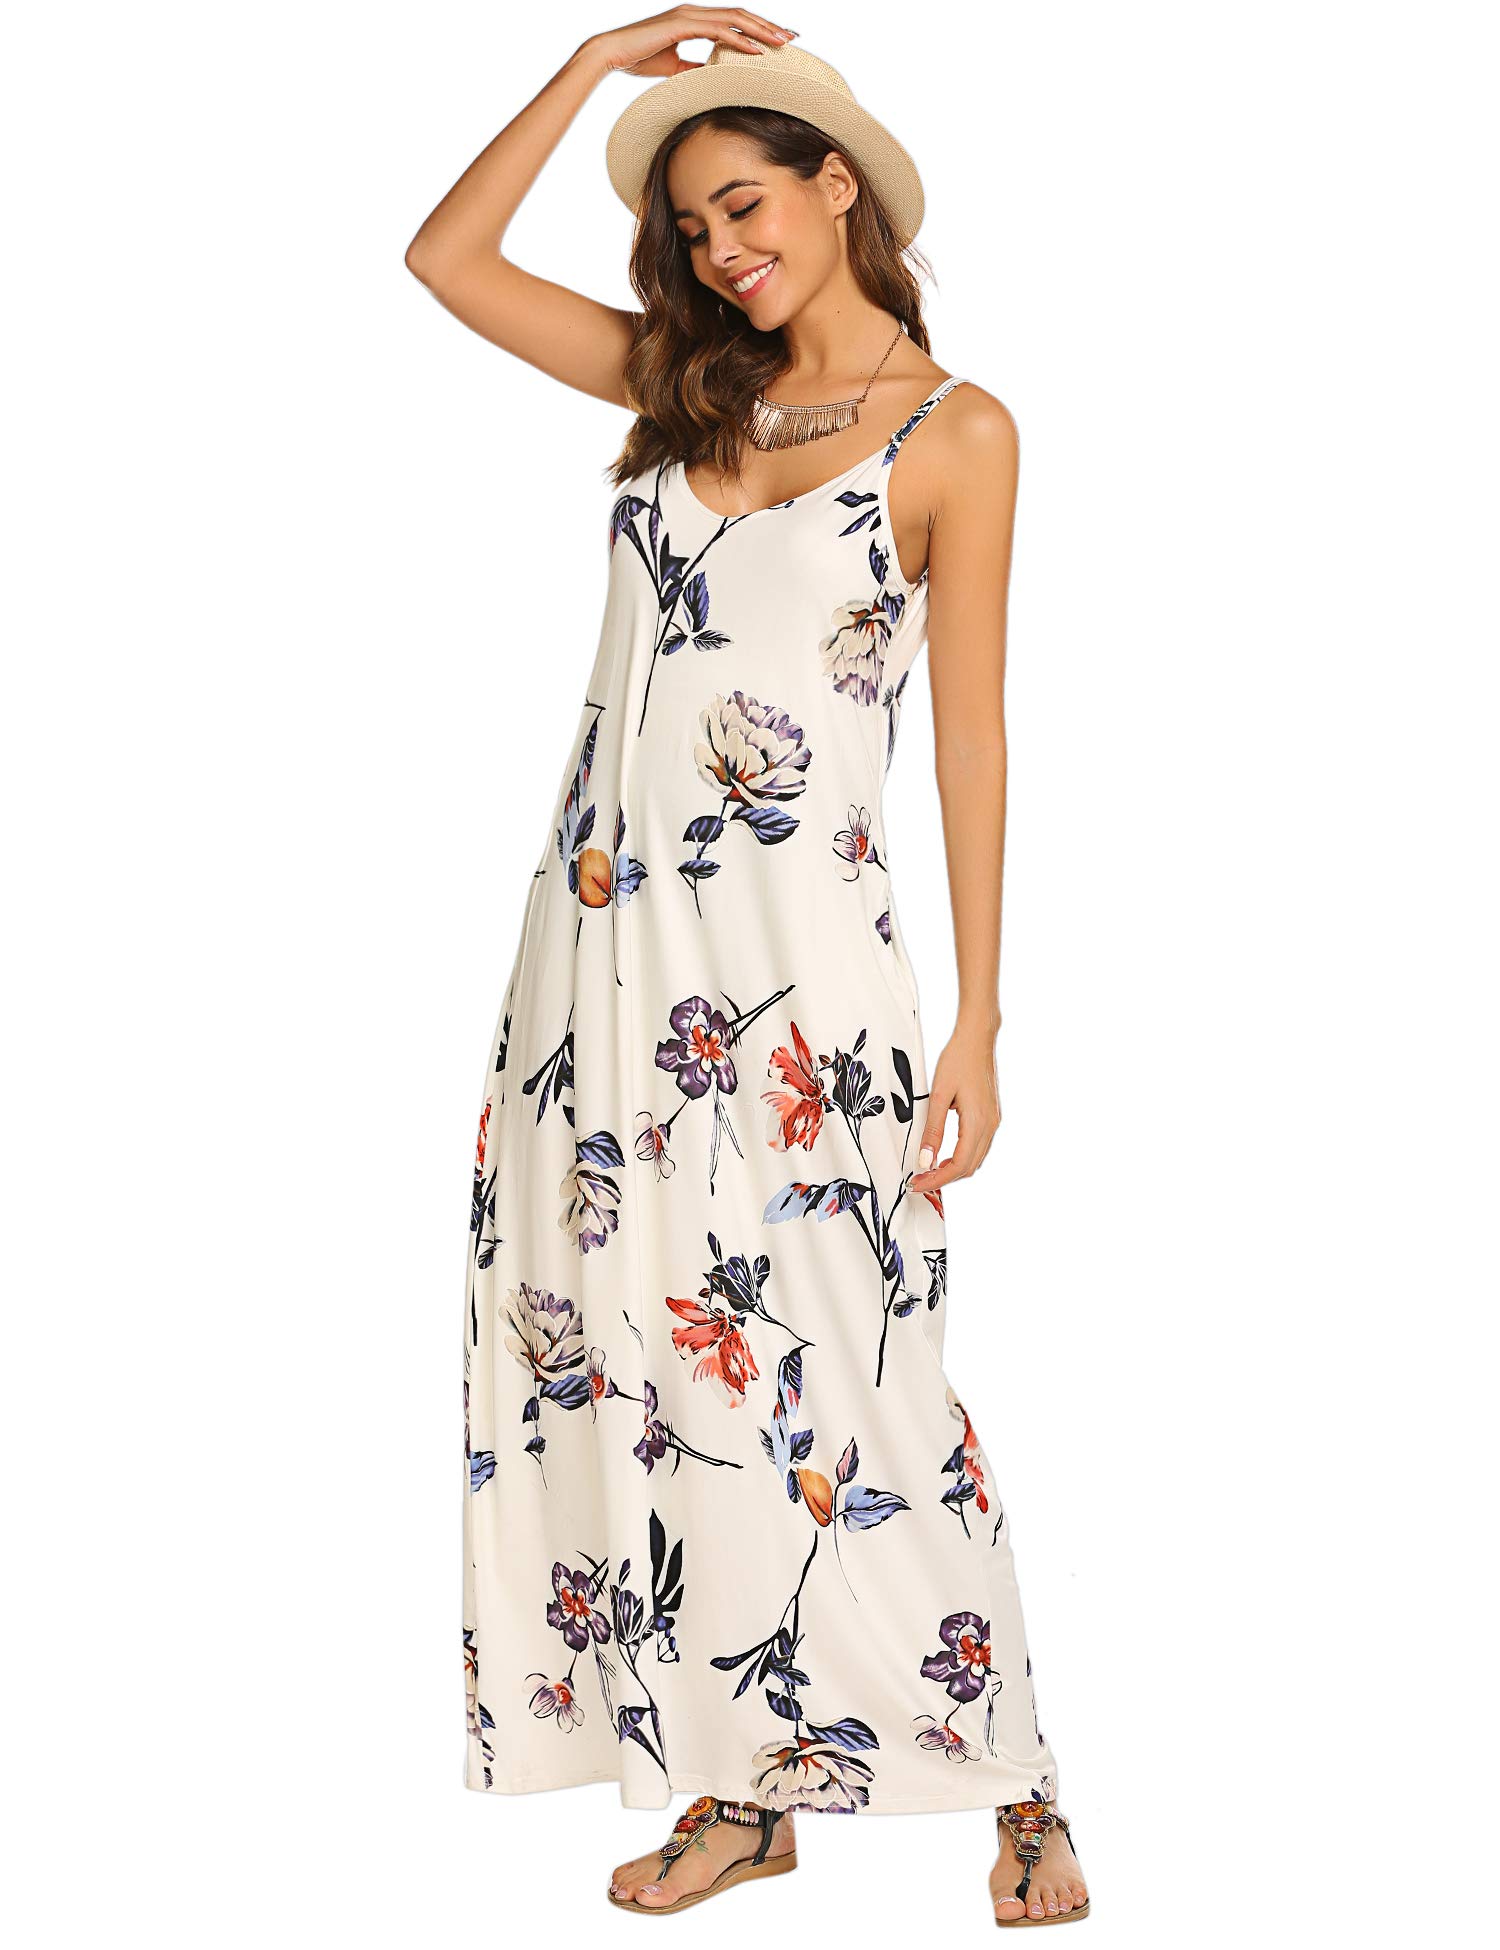 OURS Women's Summer Floral Long Maxi Dress with Pockets